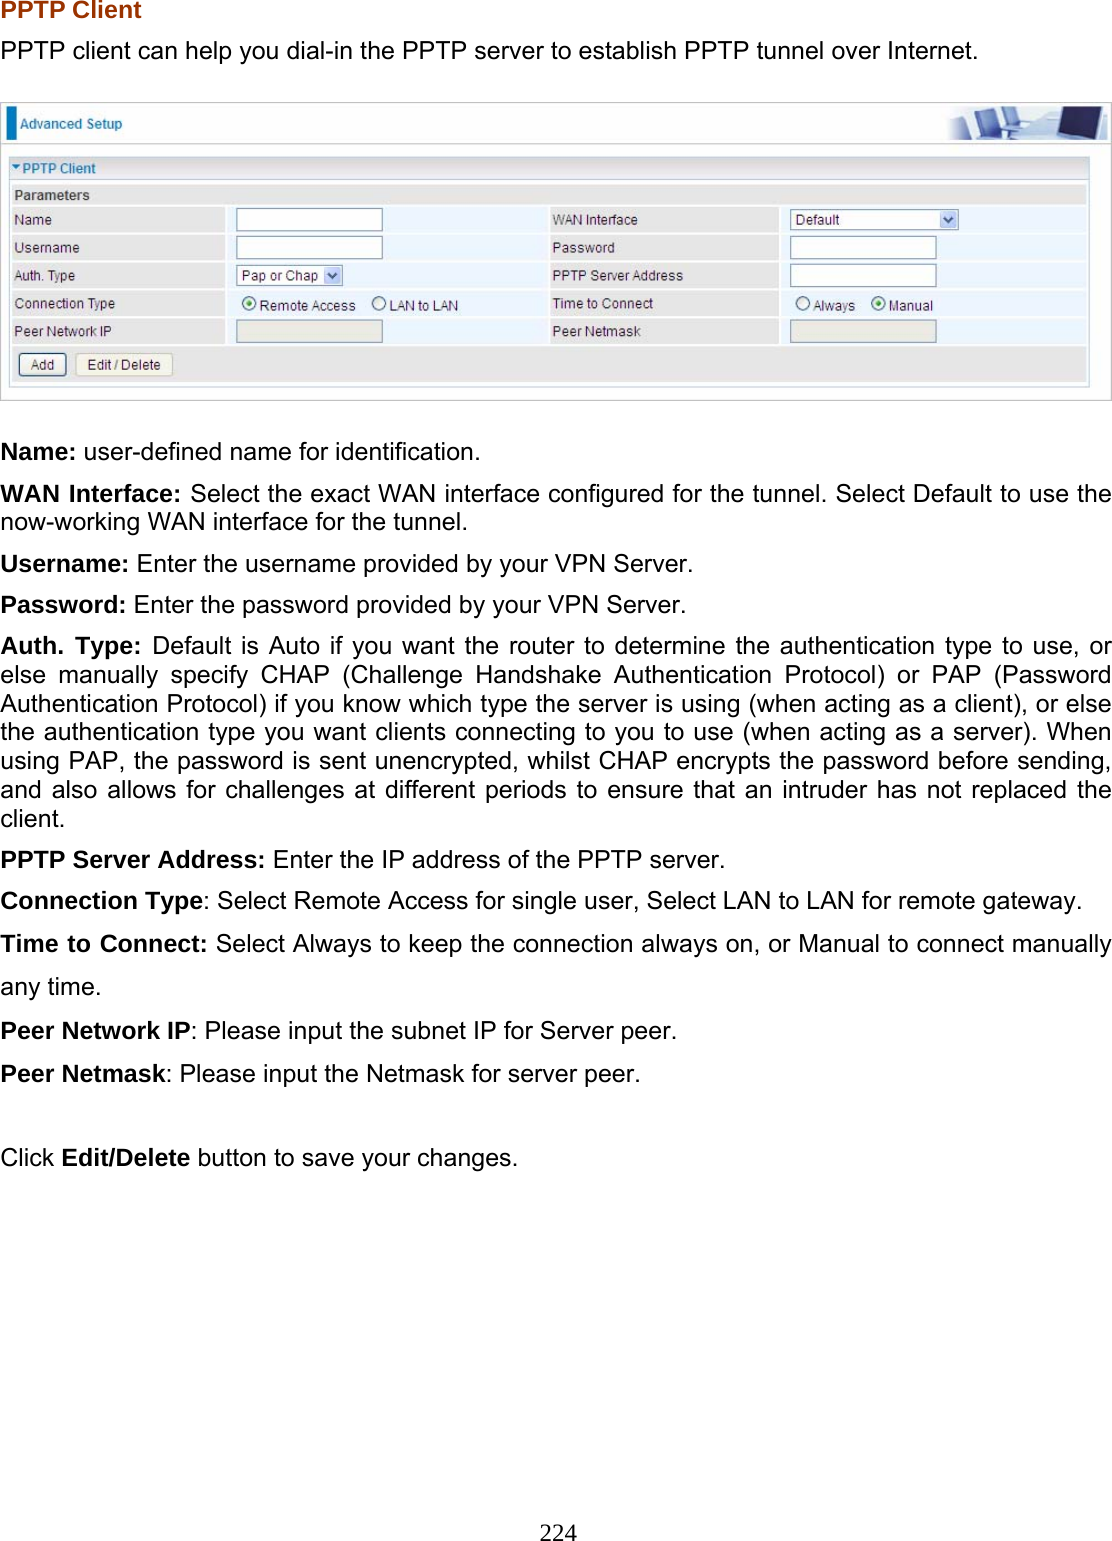 224 PPTP Client PPTP client can help you dial-in the PPTP server to establish PPTP tunnel over Internet.  Name: user-defined name for identification. WAN Interface: Select the exact WAN interface configured for the tunnel. Select Default to use the now-working WAN interface for the tunnel. Username: Enter the username provided by your VPN Server. Password: Enter the password provided by your VPN Server.  Auth. Type: Default is Auto if you want the router to determine the authentication type to use, or else manually specify CHAP (Challenge Handshake Authentication Protocol) or PAP (Password Authentication Protocol) if you know which type the server is using (when acting as a client), or else the authentication type you want clients connecting to you to use (when acting as a server). When using PAP, the password is sent unencrypted, whilst CHAP encrypts the password before sending, and also allows for challenges at different periods to ensure that an intruder has not replaced the client. PPTP Server Address: Enter the IP address of the PPTP server. Connection Type: Select Remote Access for single user, Select LAN to LAN for remote gateway. Time to Connect: Select Always to keep the connection always on, or Manual to connect manually any time. Peer Network IP: Please input the subnet IP for Server peer. Peer Netmask: Please input the Netmask for server peer.  Click Edit/Delete button to save your changes.           